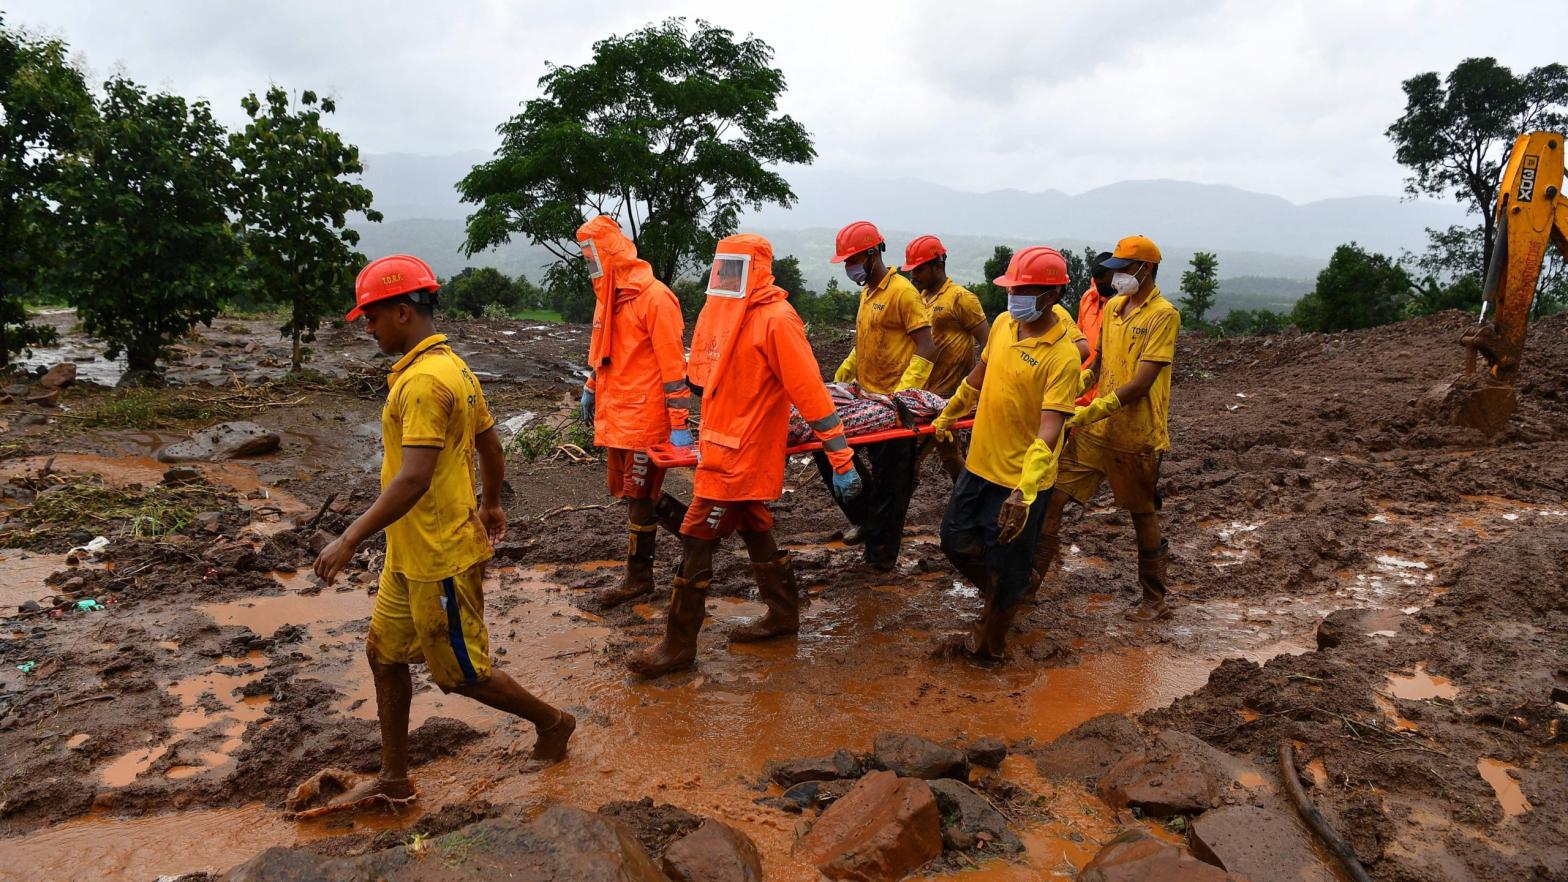 Emergency personnel carry the body of a victim at the site of a landslide at Taliye, a village in India about 110 miles (180 kilometers) southeast of Mumbai, on July 24, 2021. (Photo: Indranil Mukherjee, Getty Images)